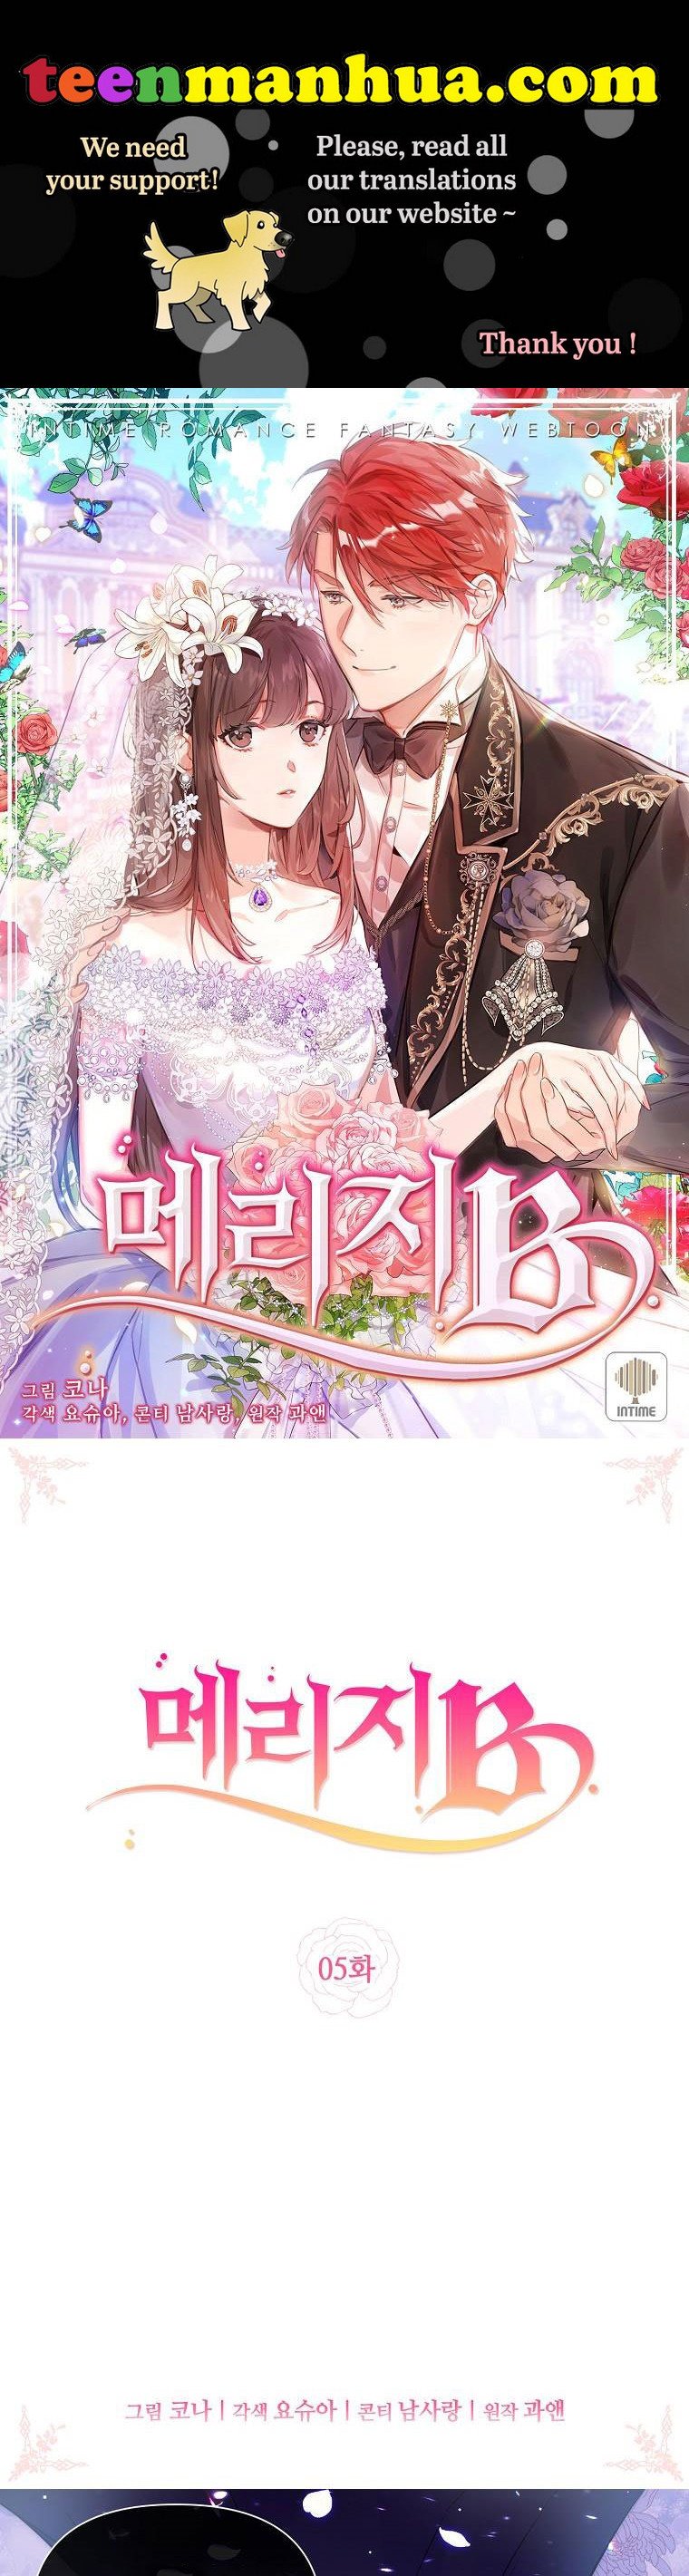 Marriage B chapter 5